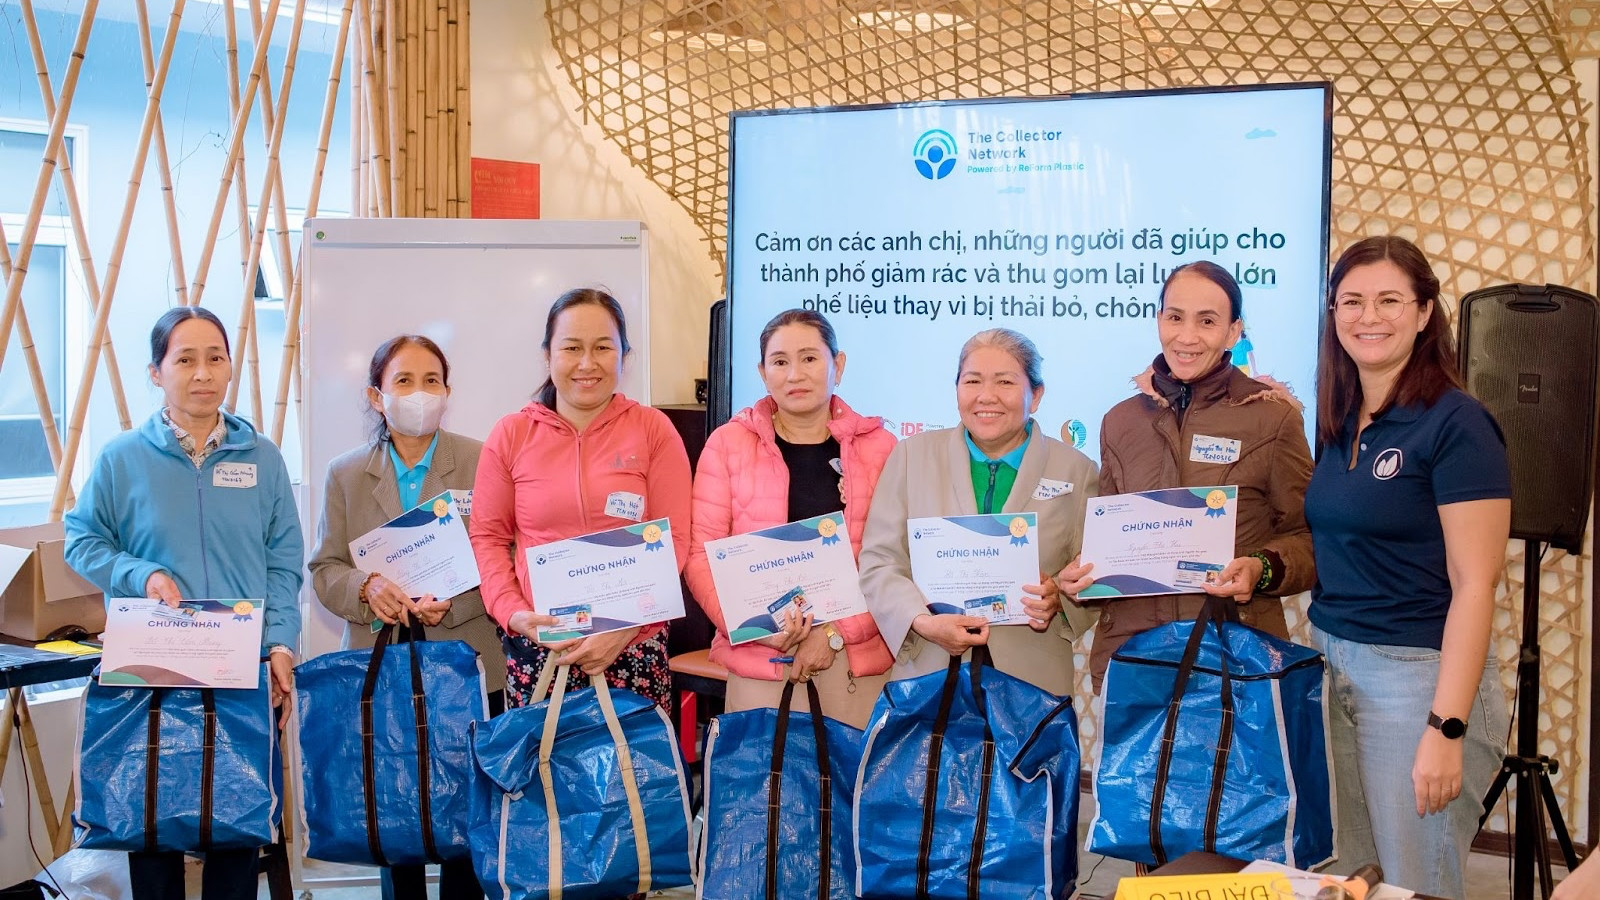 Vital learnings from our work in building inclusive plastic waste systems in South and Southeast Asia